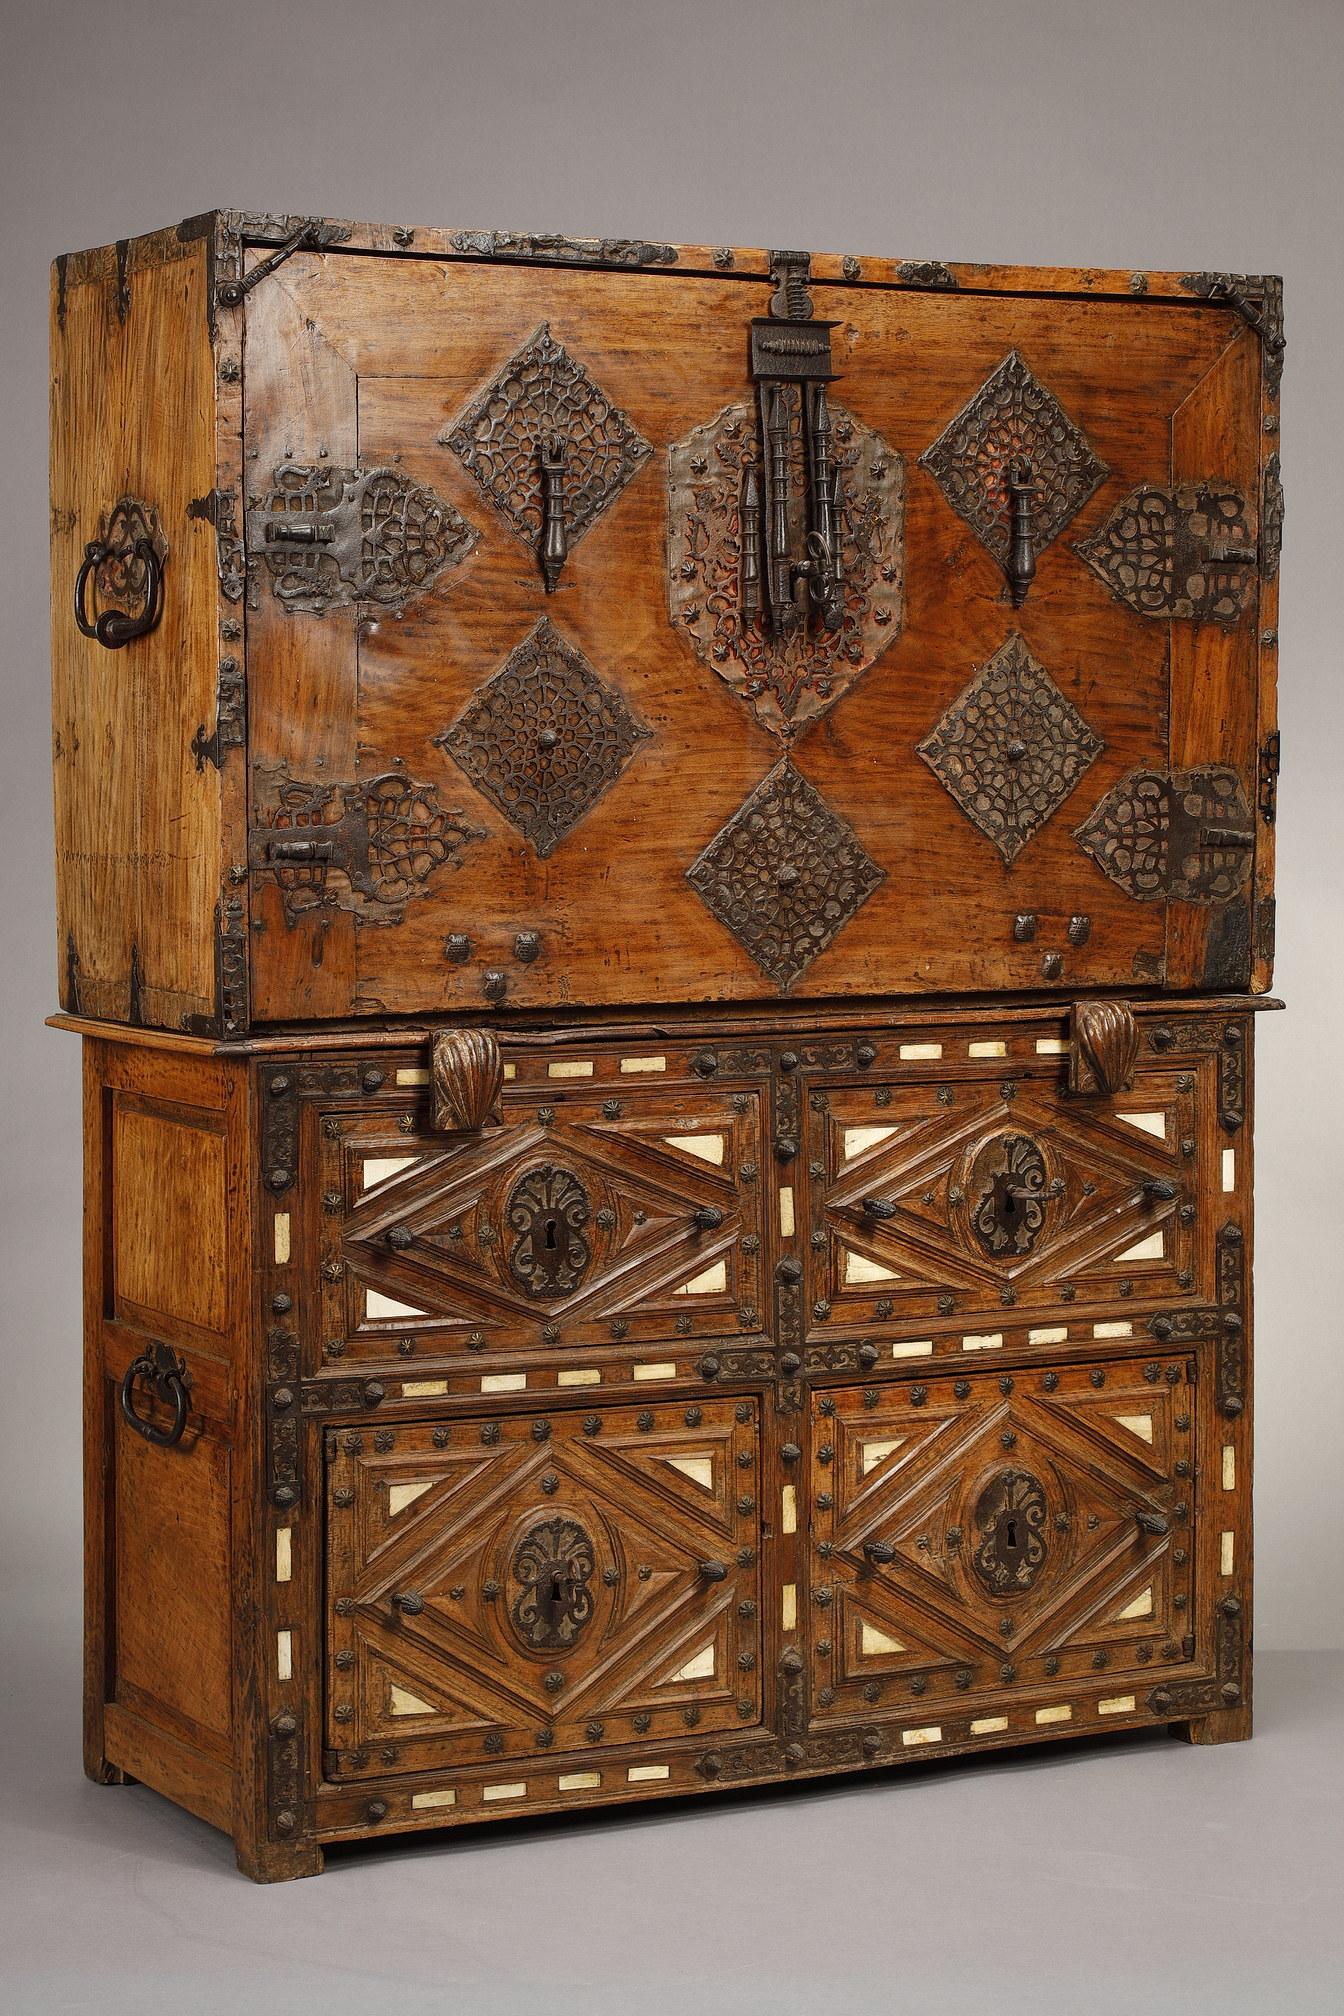 Magnificent Bargueno, Spanish cabinet of the XVIIth century, in walnut on its taquillon, chest of drawers. The set is divided into two superposable parts. The upper part, called Bargueno, has two side handles and a wrought iron openwork decoration